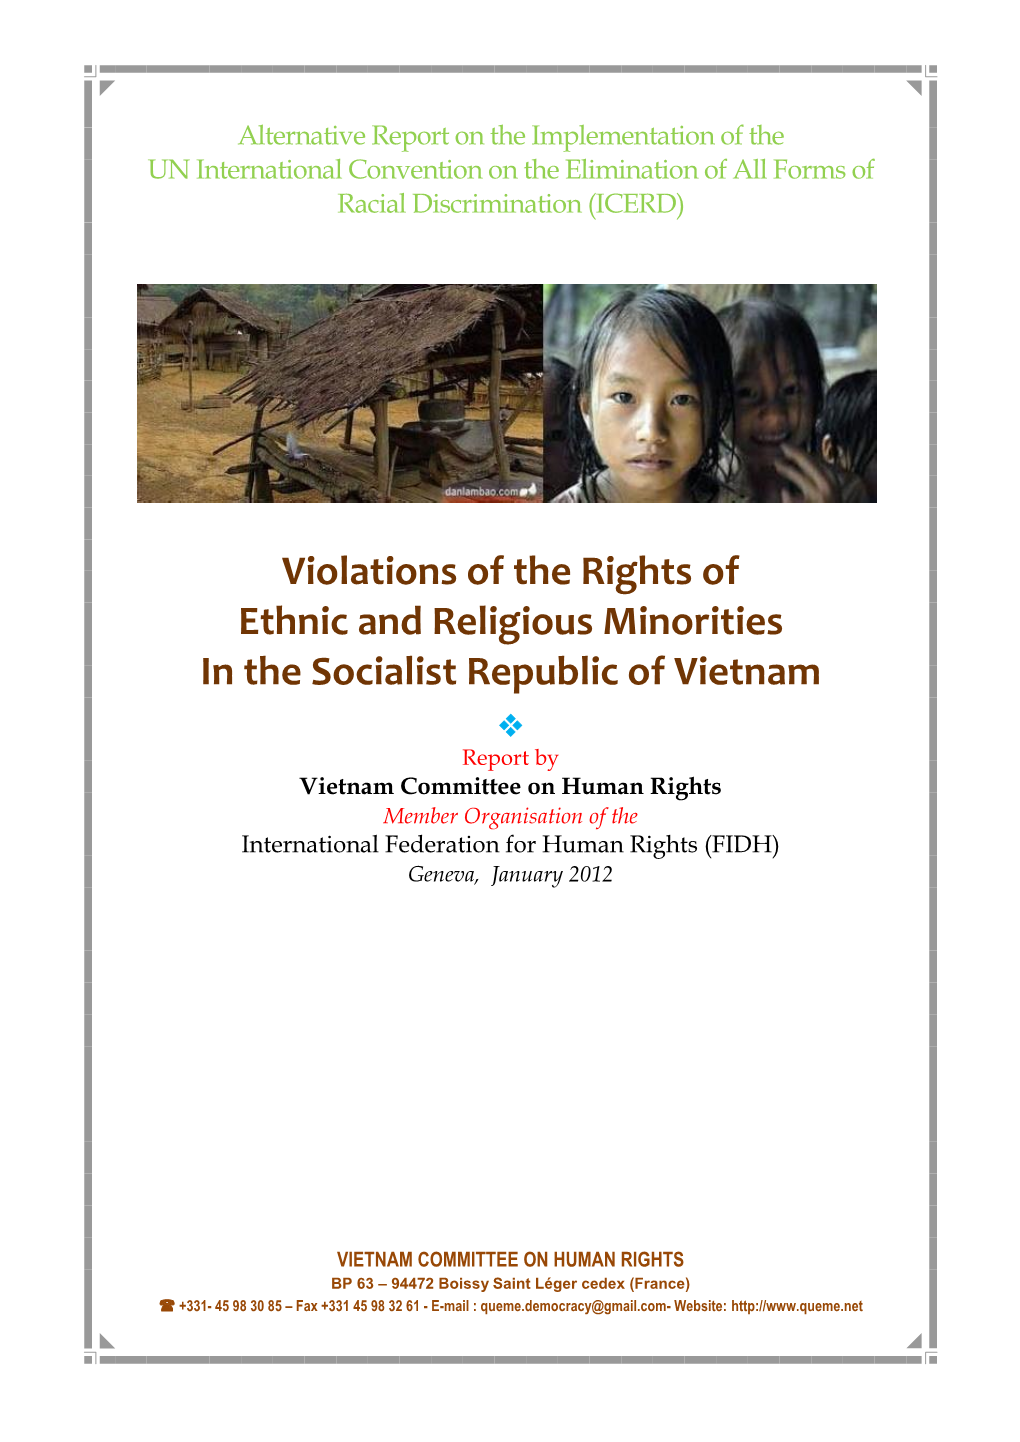 Violations of the Rights of Ethnic and Religious Minorities in the Socialist